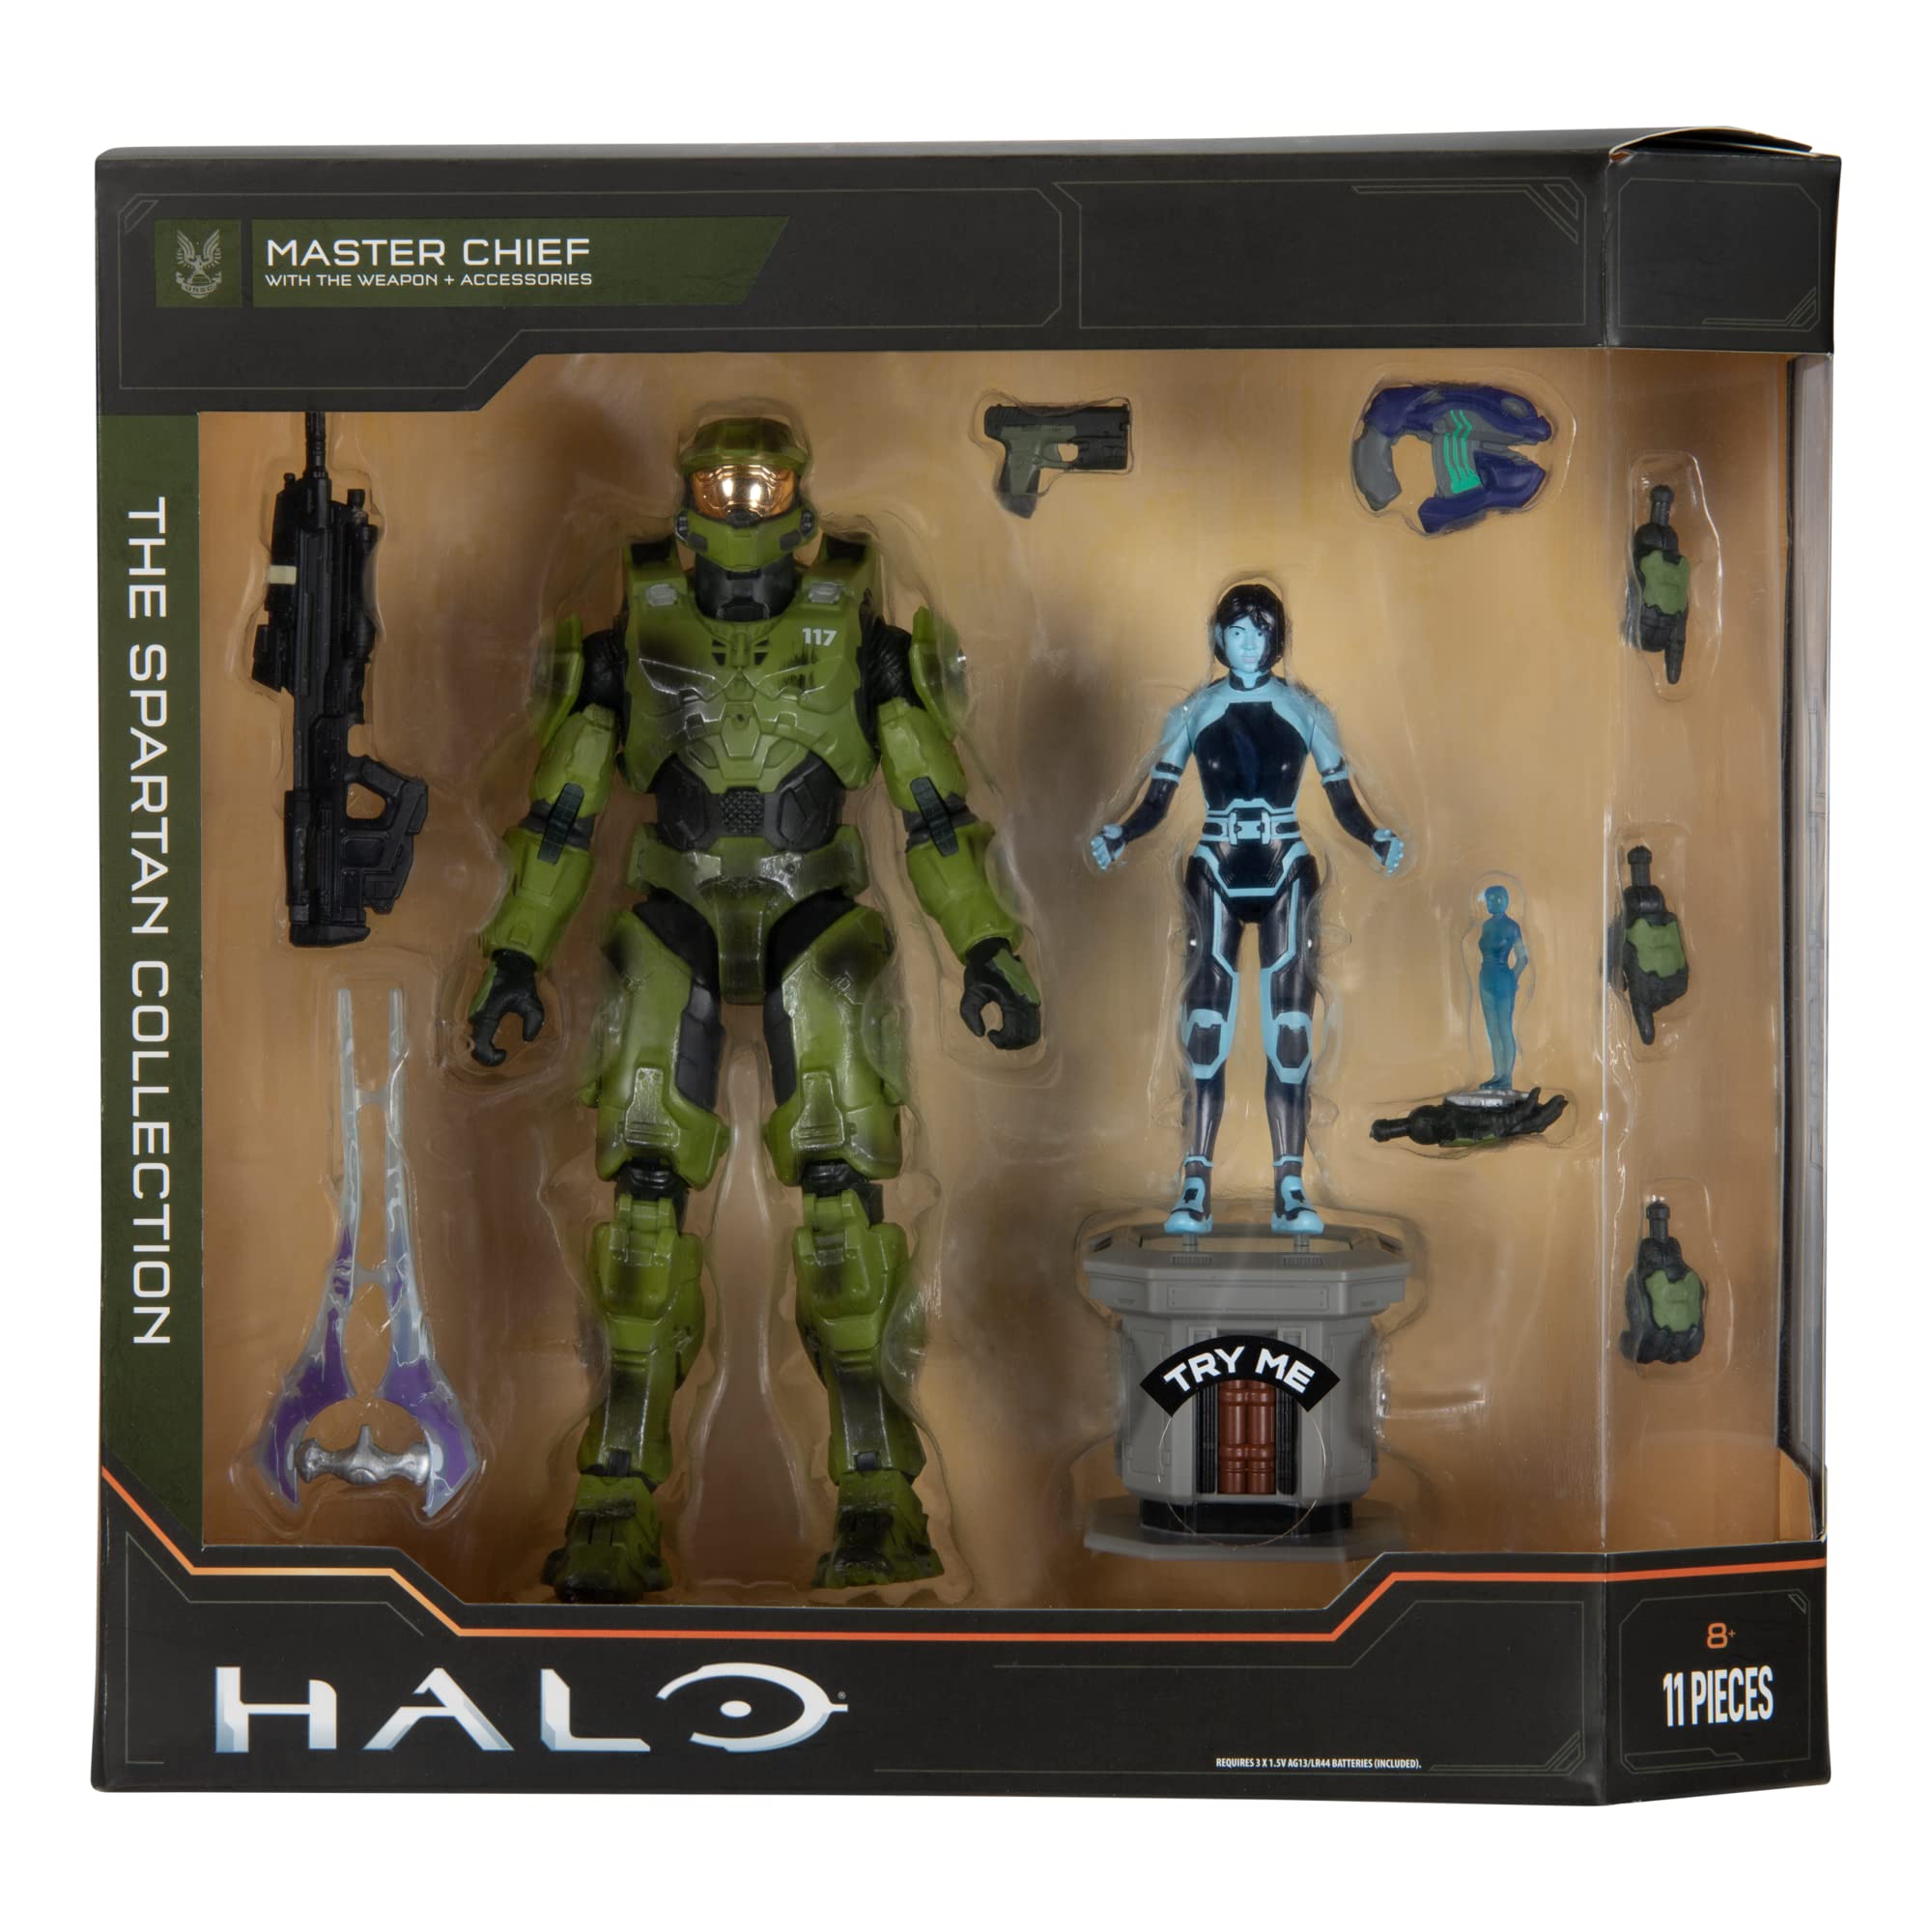 Halo The Spartan Collection Master Chief with the weapon + accessories 6.5-Inch Action Figure画像